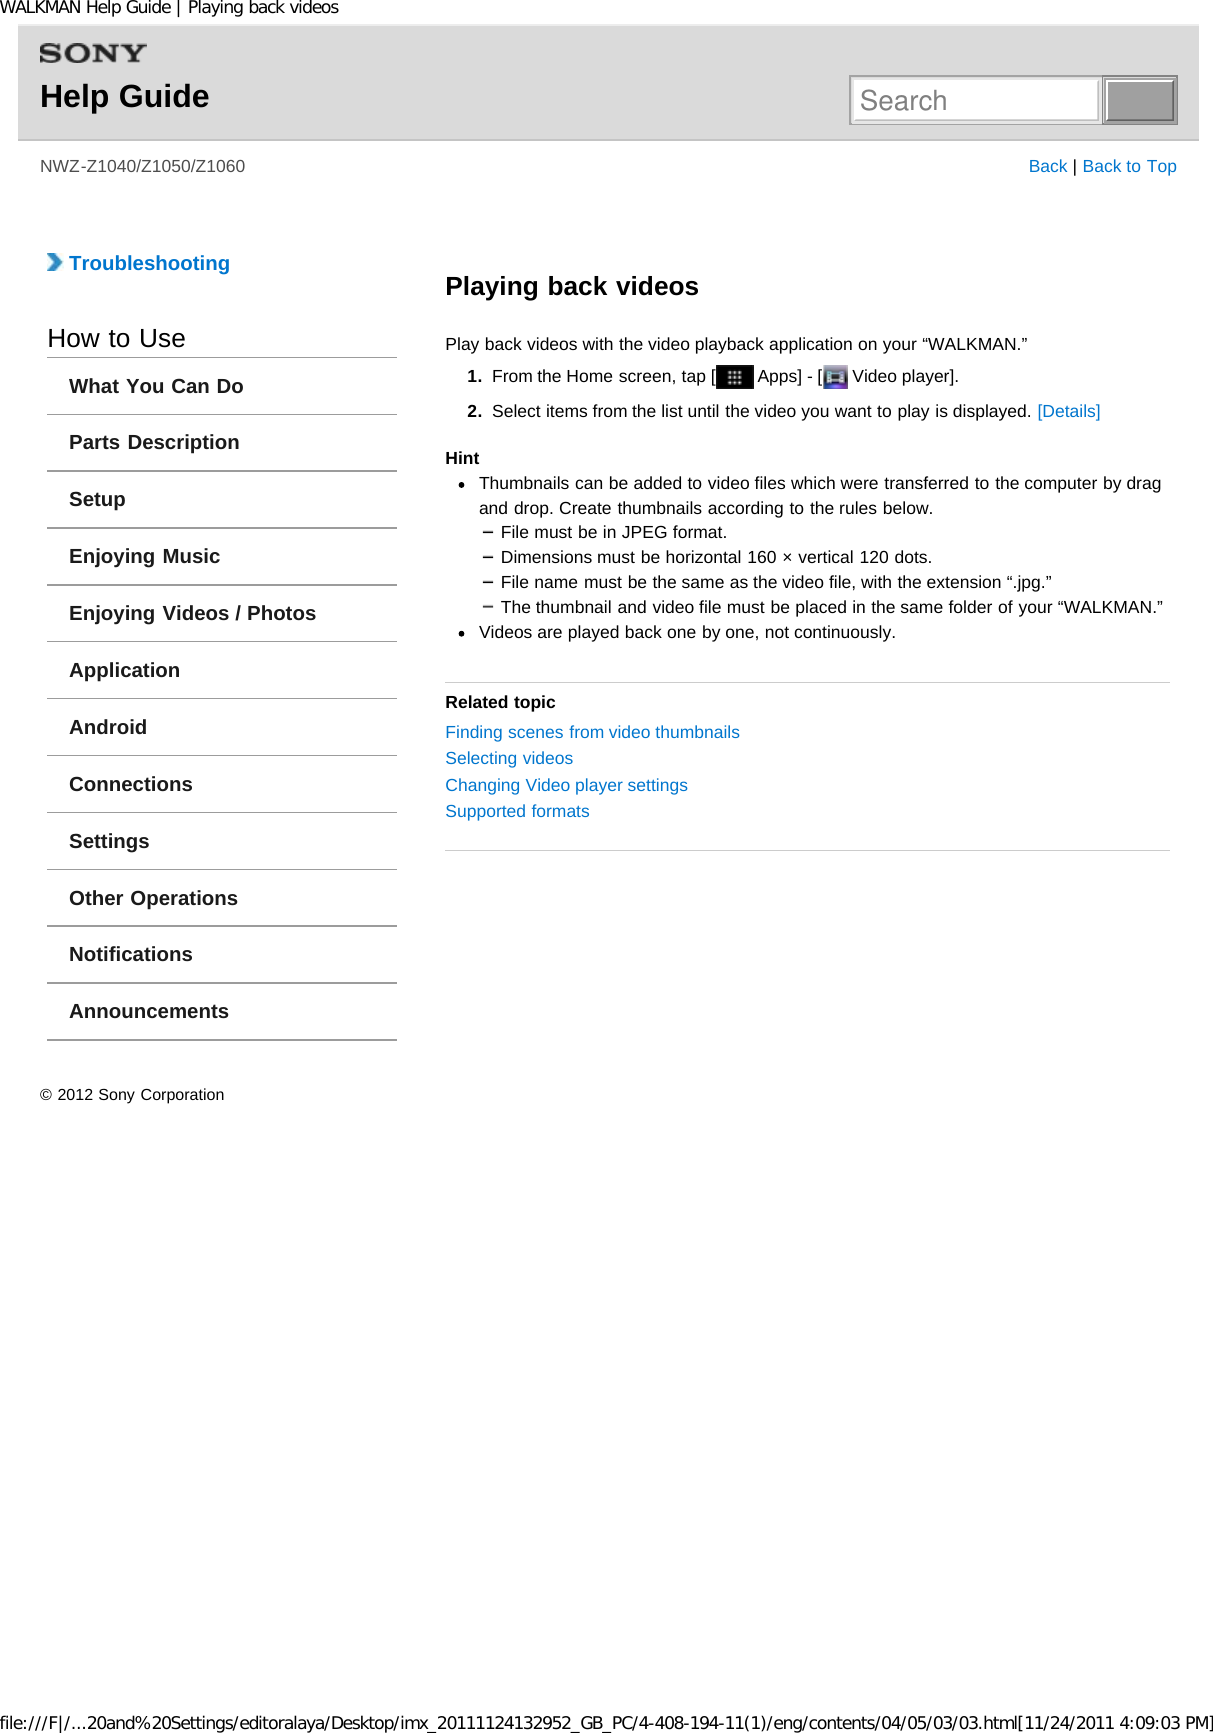 Page 193 of Sony Group NWZZ1000 Digital Media Player User Manual WALKMAN Help Guide   Top page